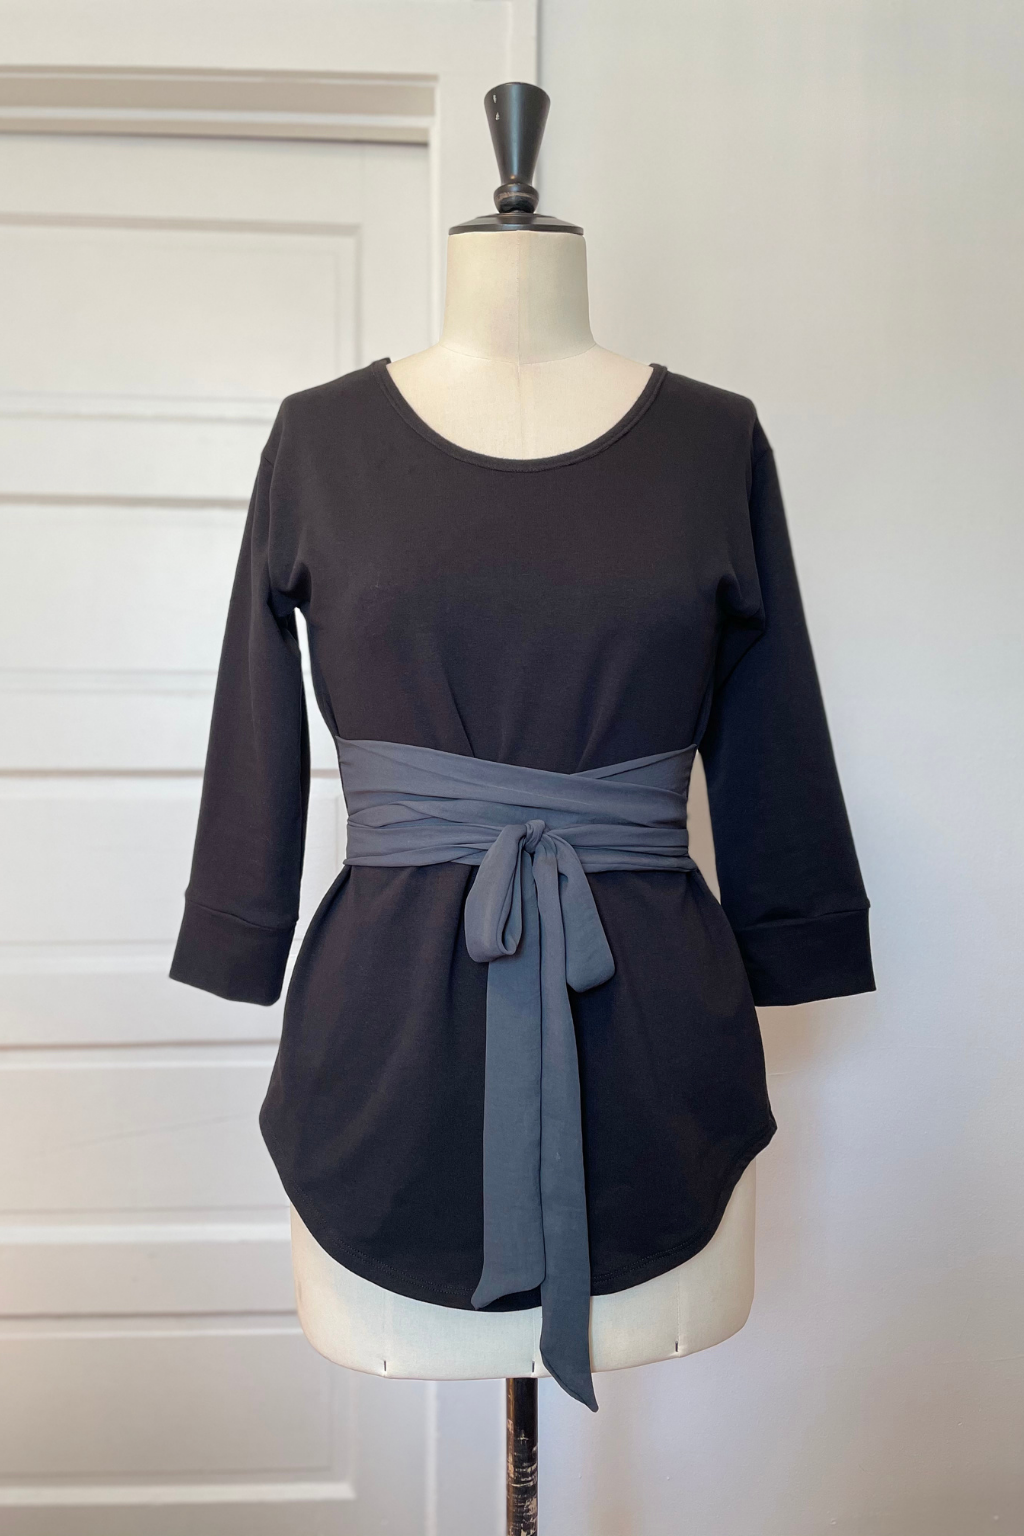 KOKOON Sweet Sweat French Terry and Chiffon Wrap Top in Black and Charcoal Front